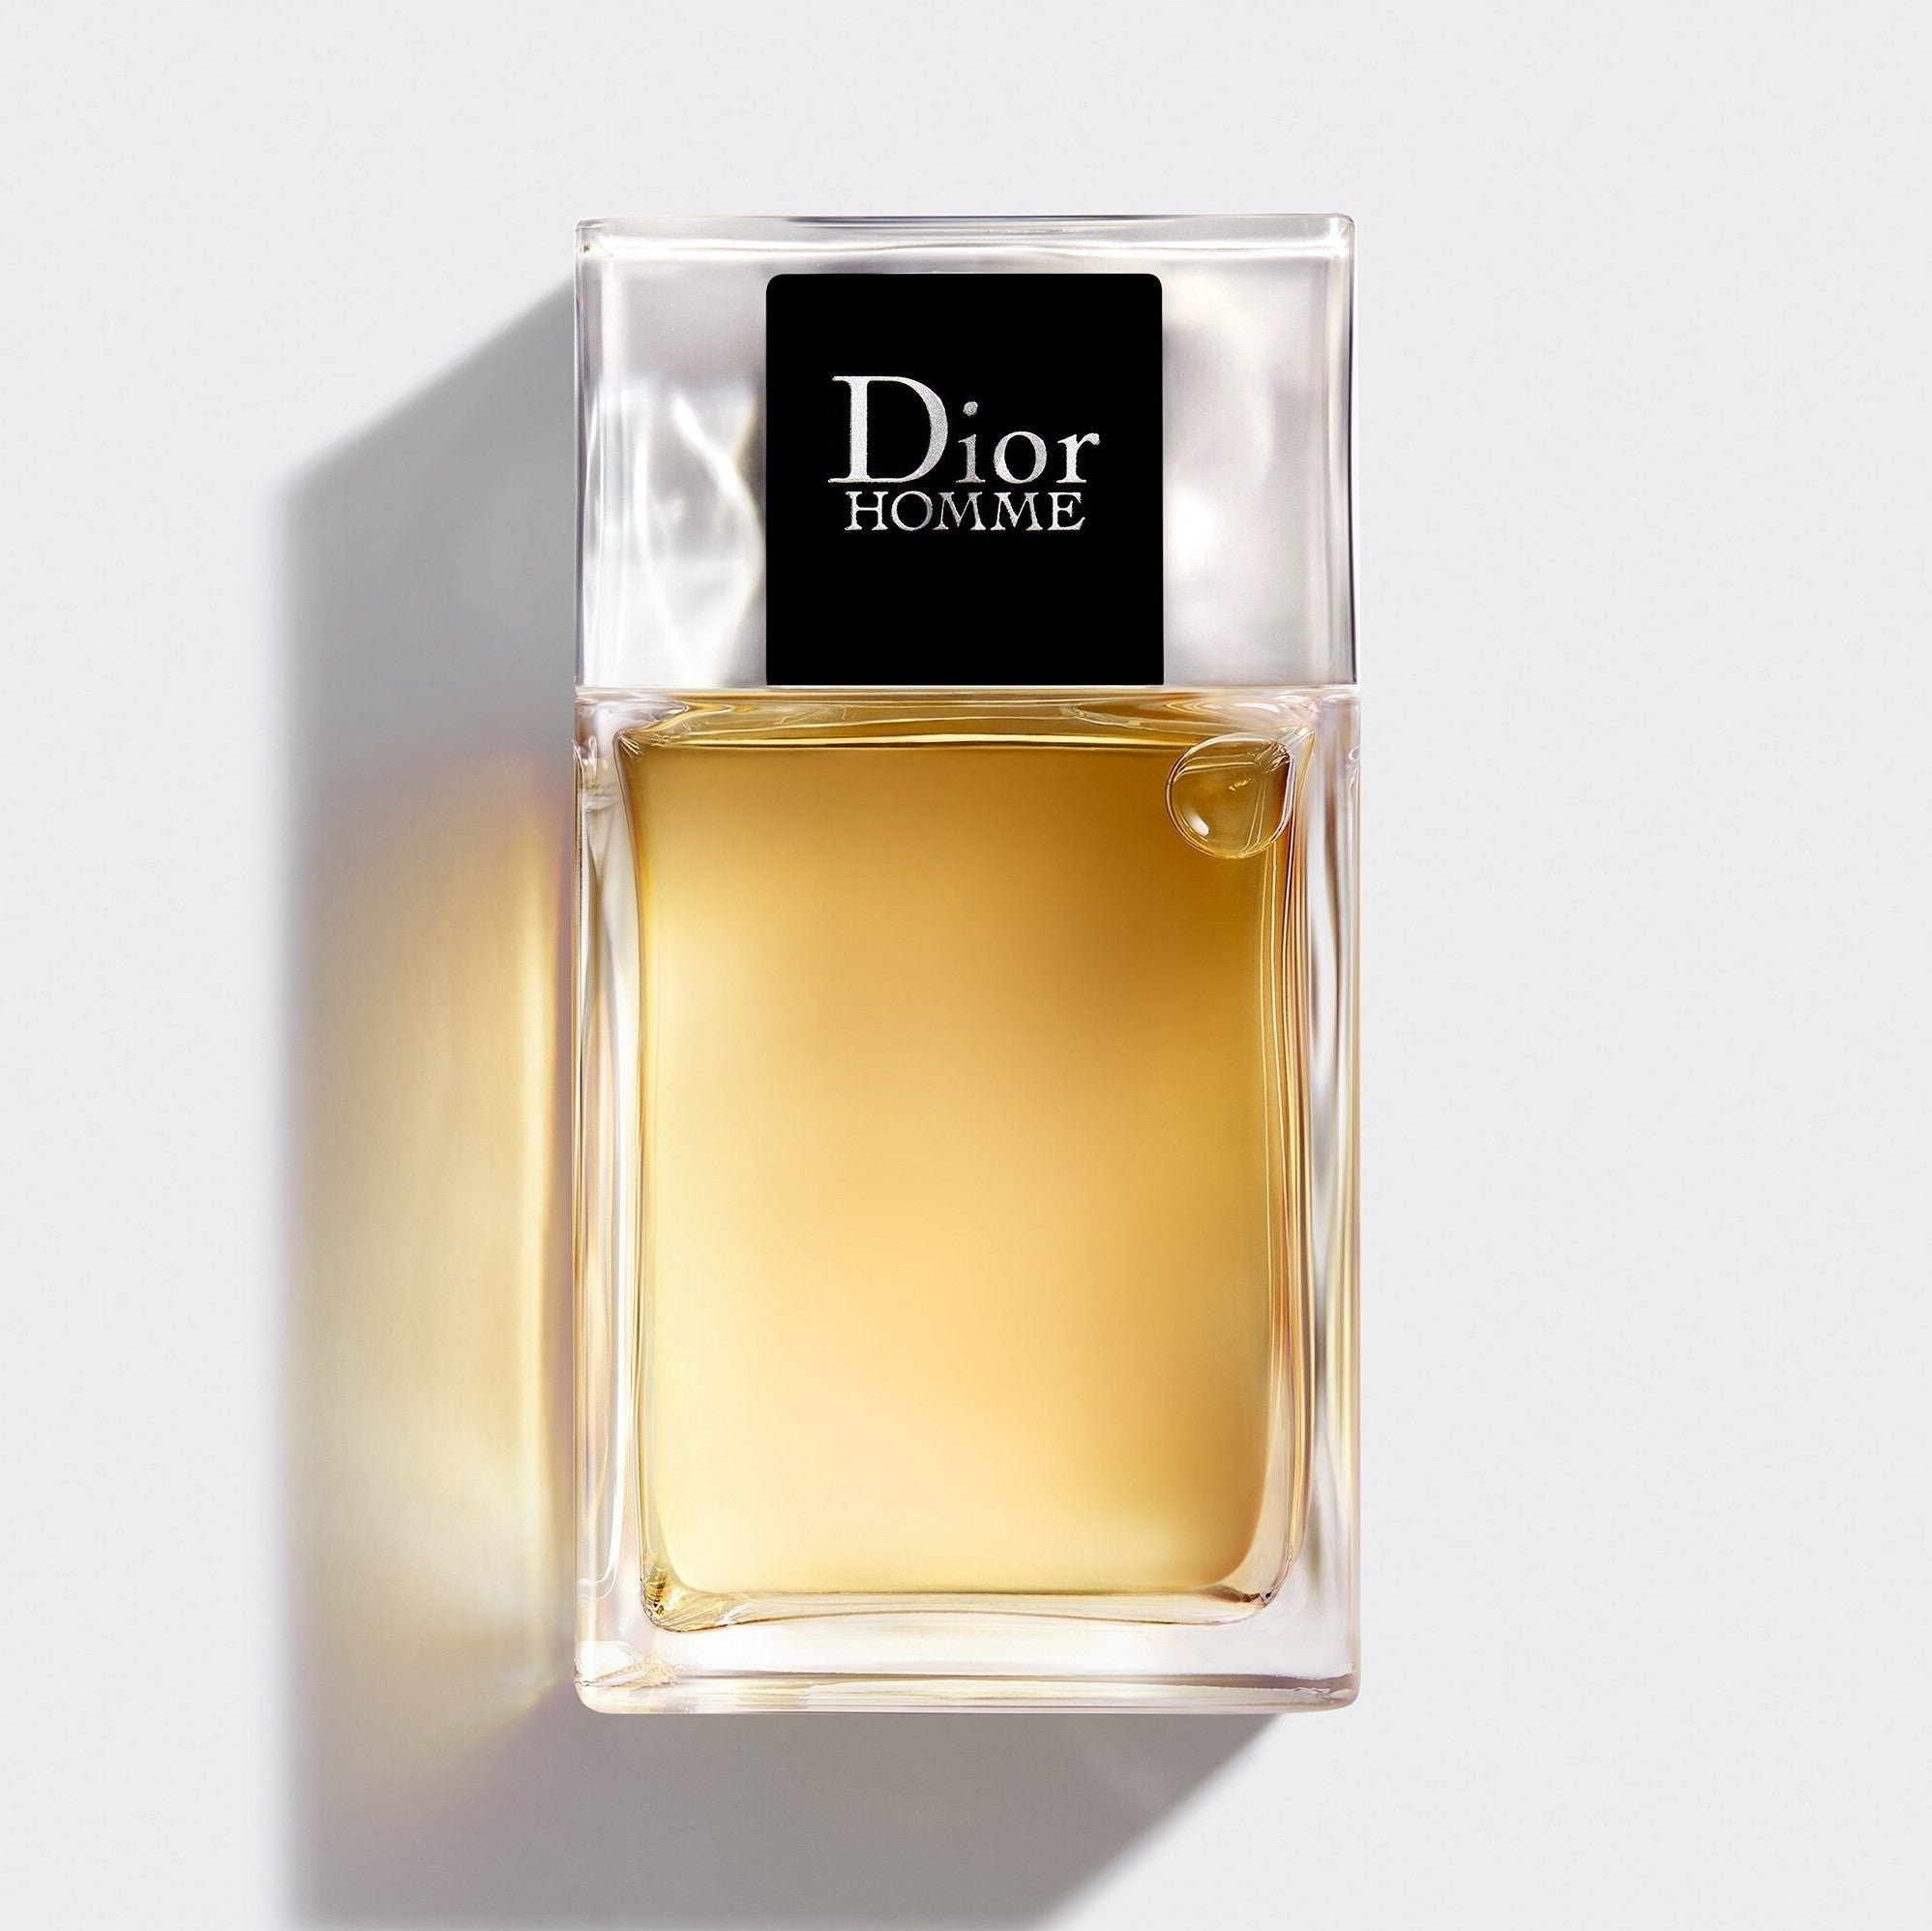 DIOR HOMME | After-shave lotion